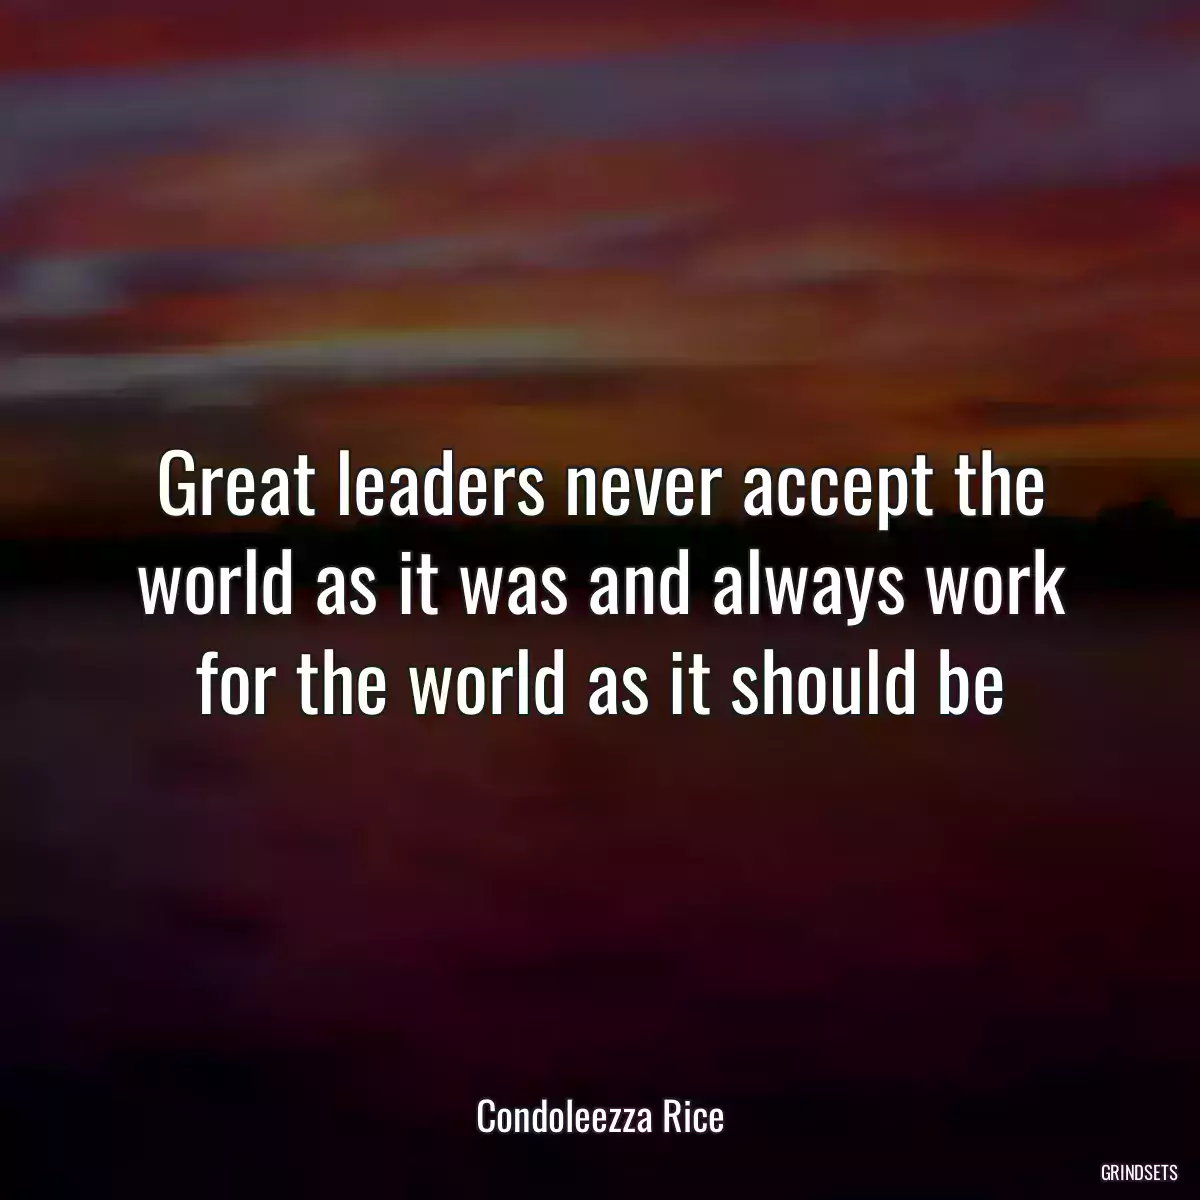 Great leaders never accept the world as it was and always work for the world as it should be